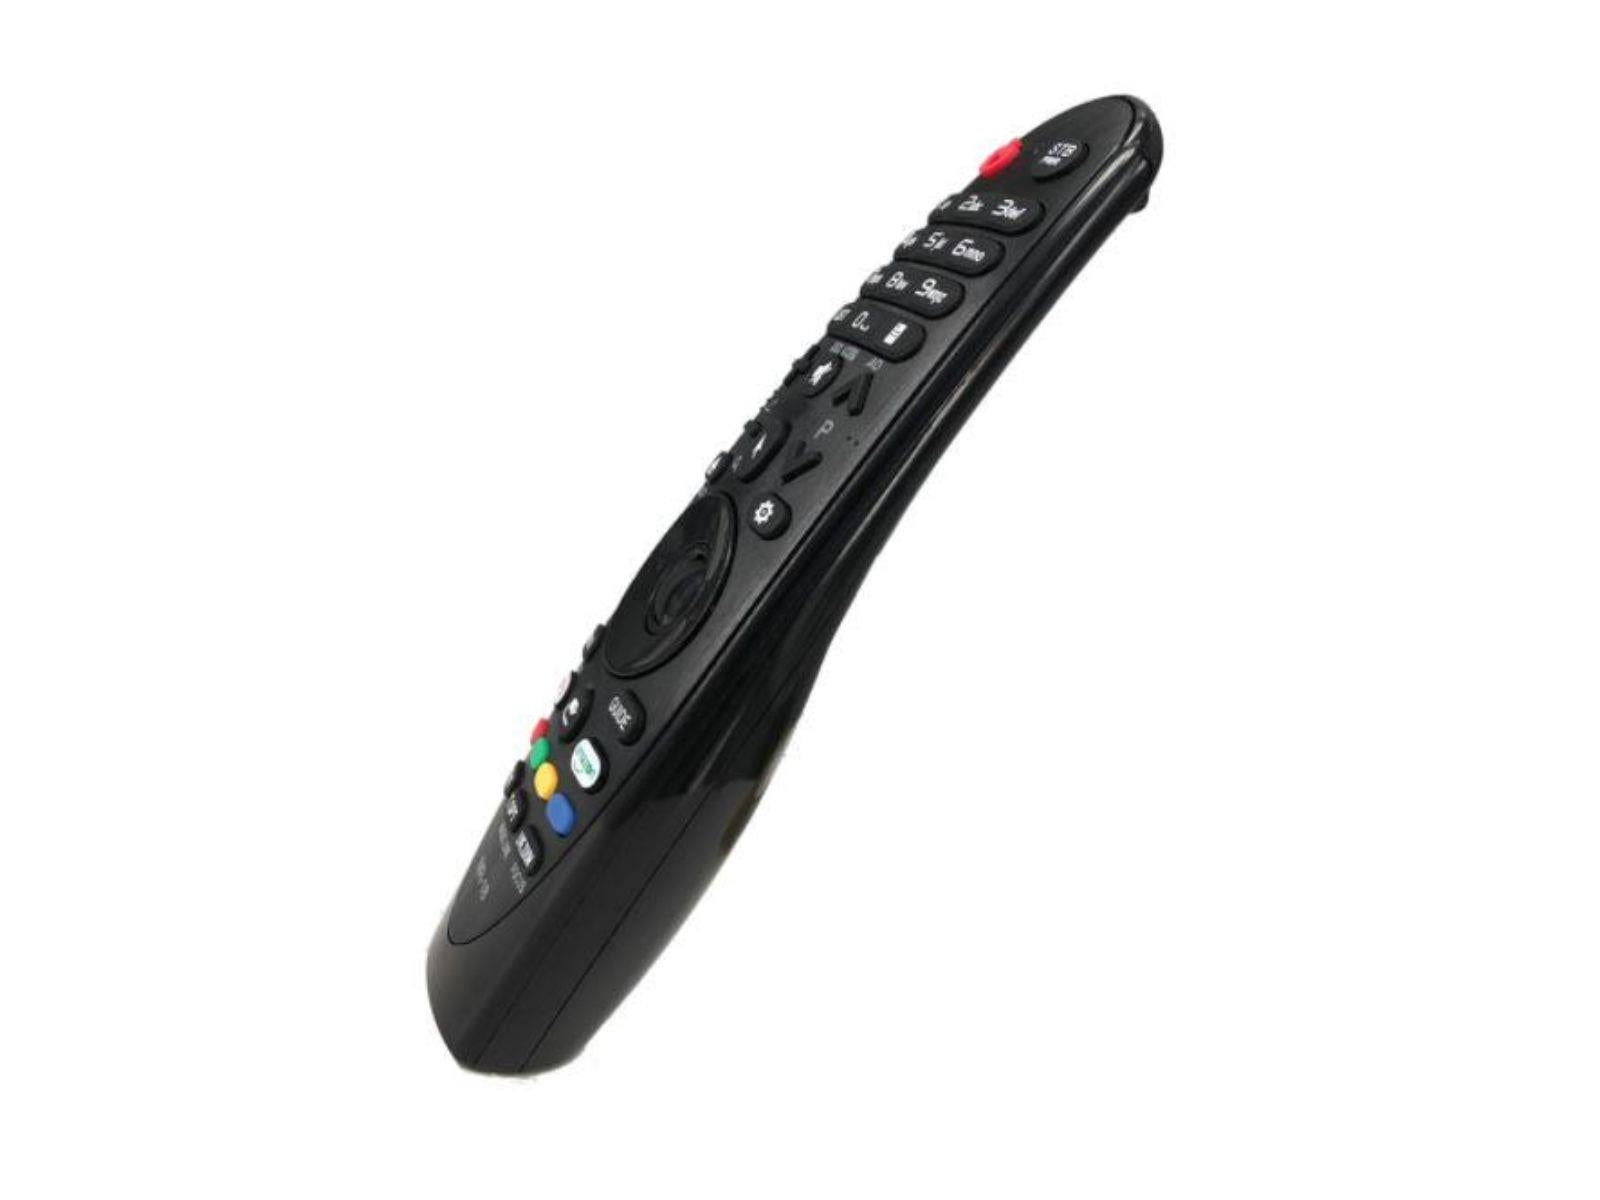 Angled Side View of the Tekeir Replacement Remote Control Compatible with LG Universal TVs